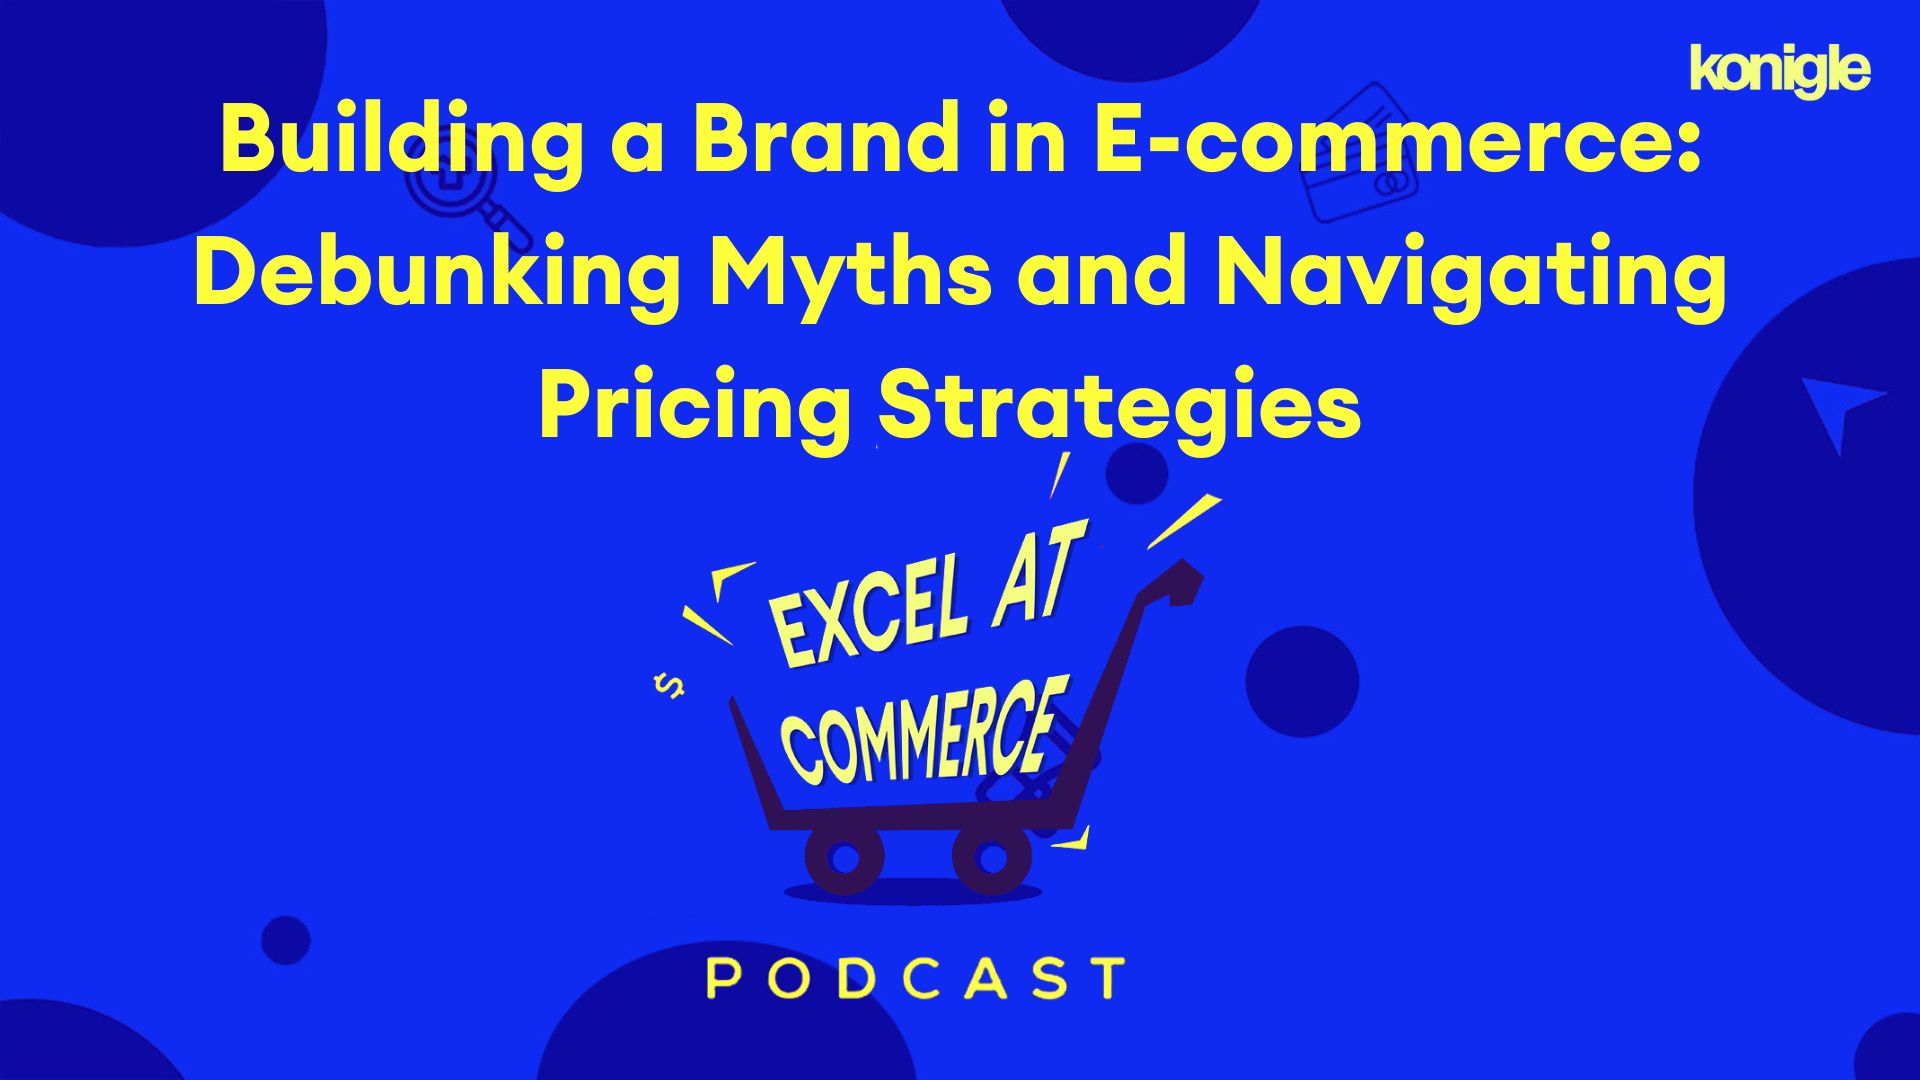 Building a Brand in E-commerce: Debunking Myths and Navigating Pricing Strategies